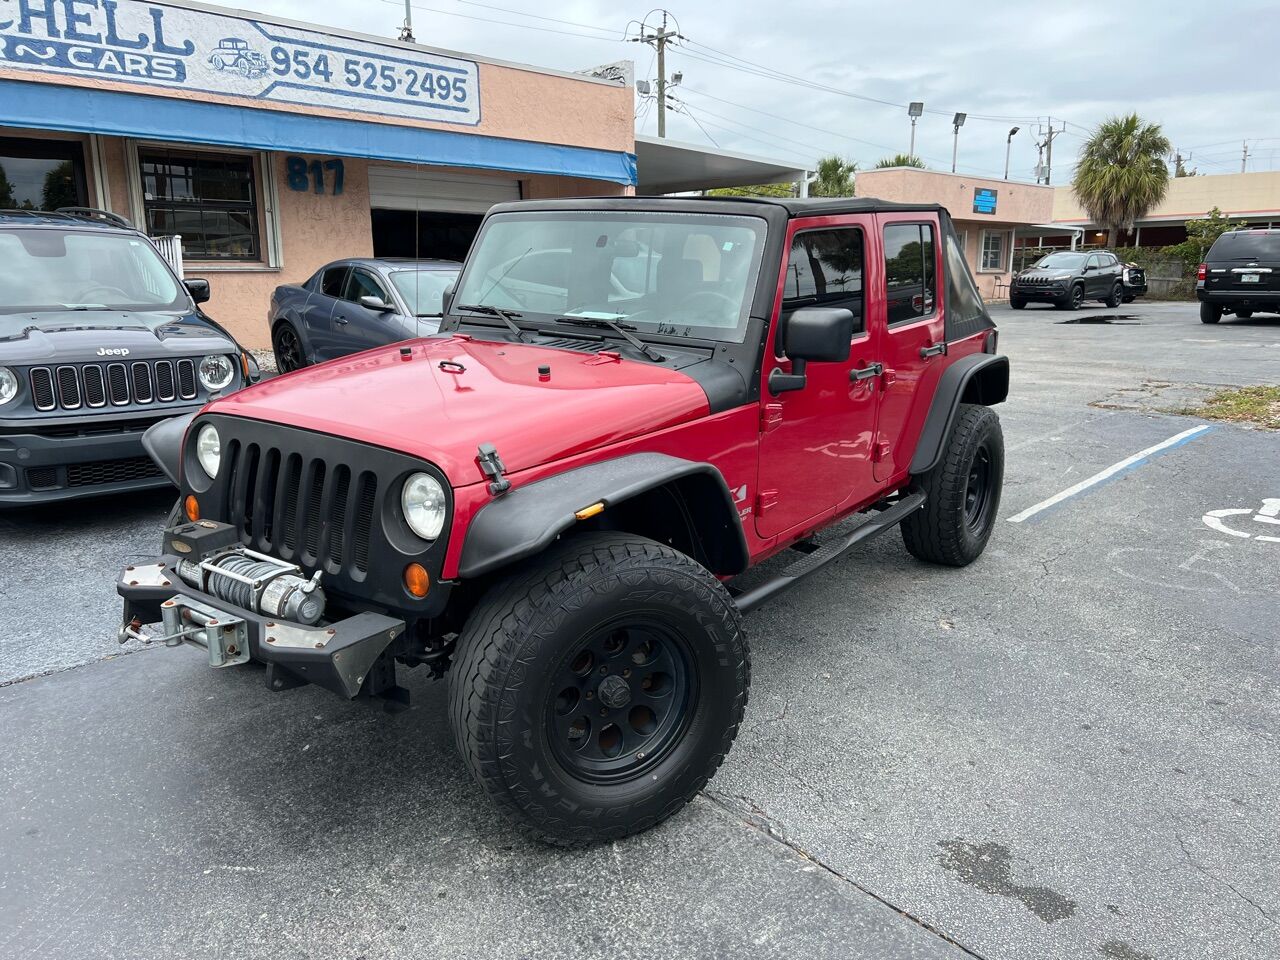 2008 Jeep Wrangler Unlimited For Sale In Fort Lauderdale, FL -  ®